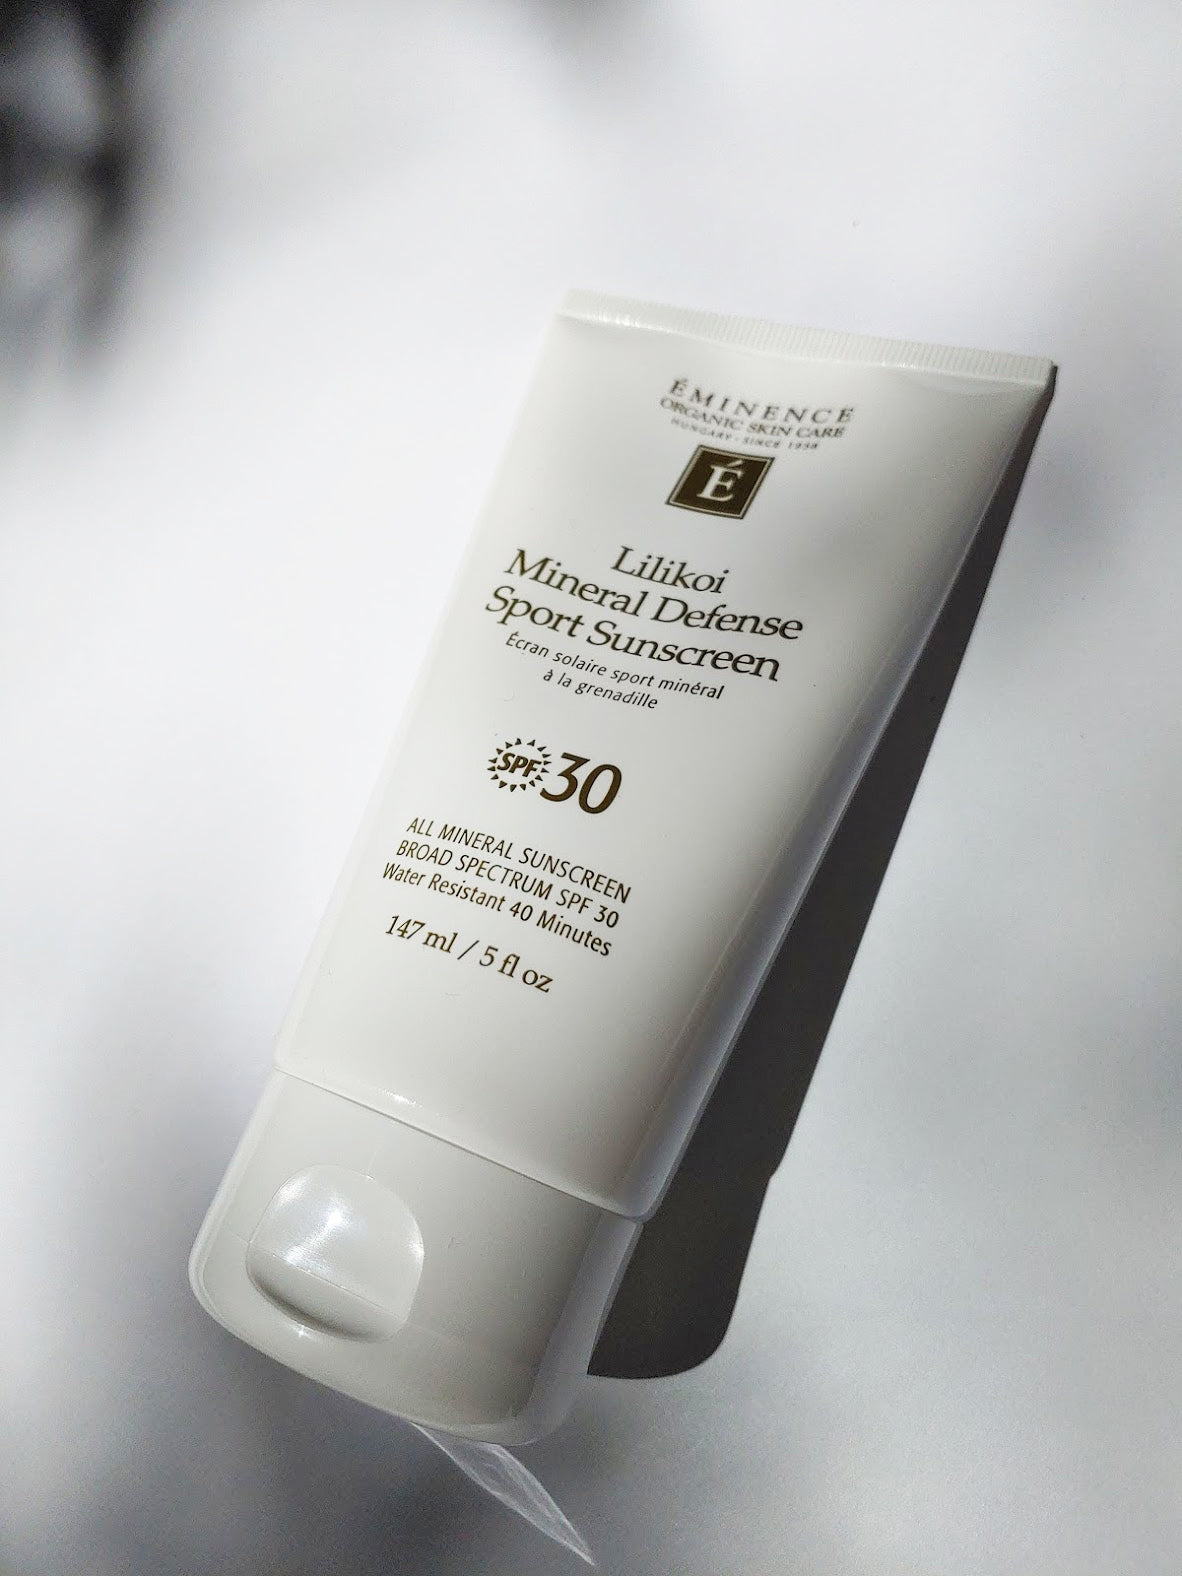 a bottle of lilikoi mineral defense sport sunscreen spf 30 by Eminence